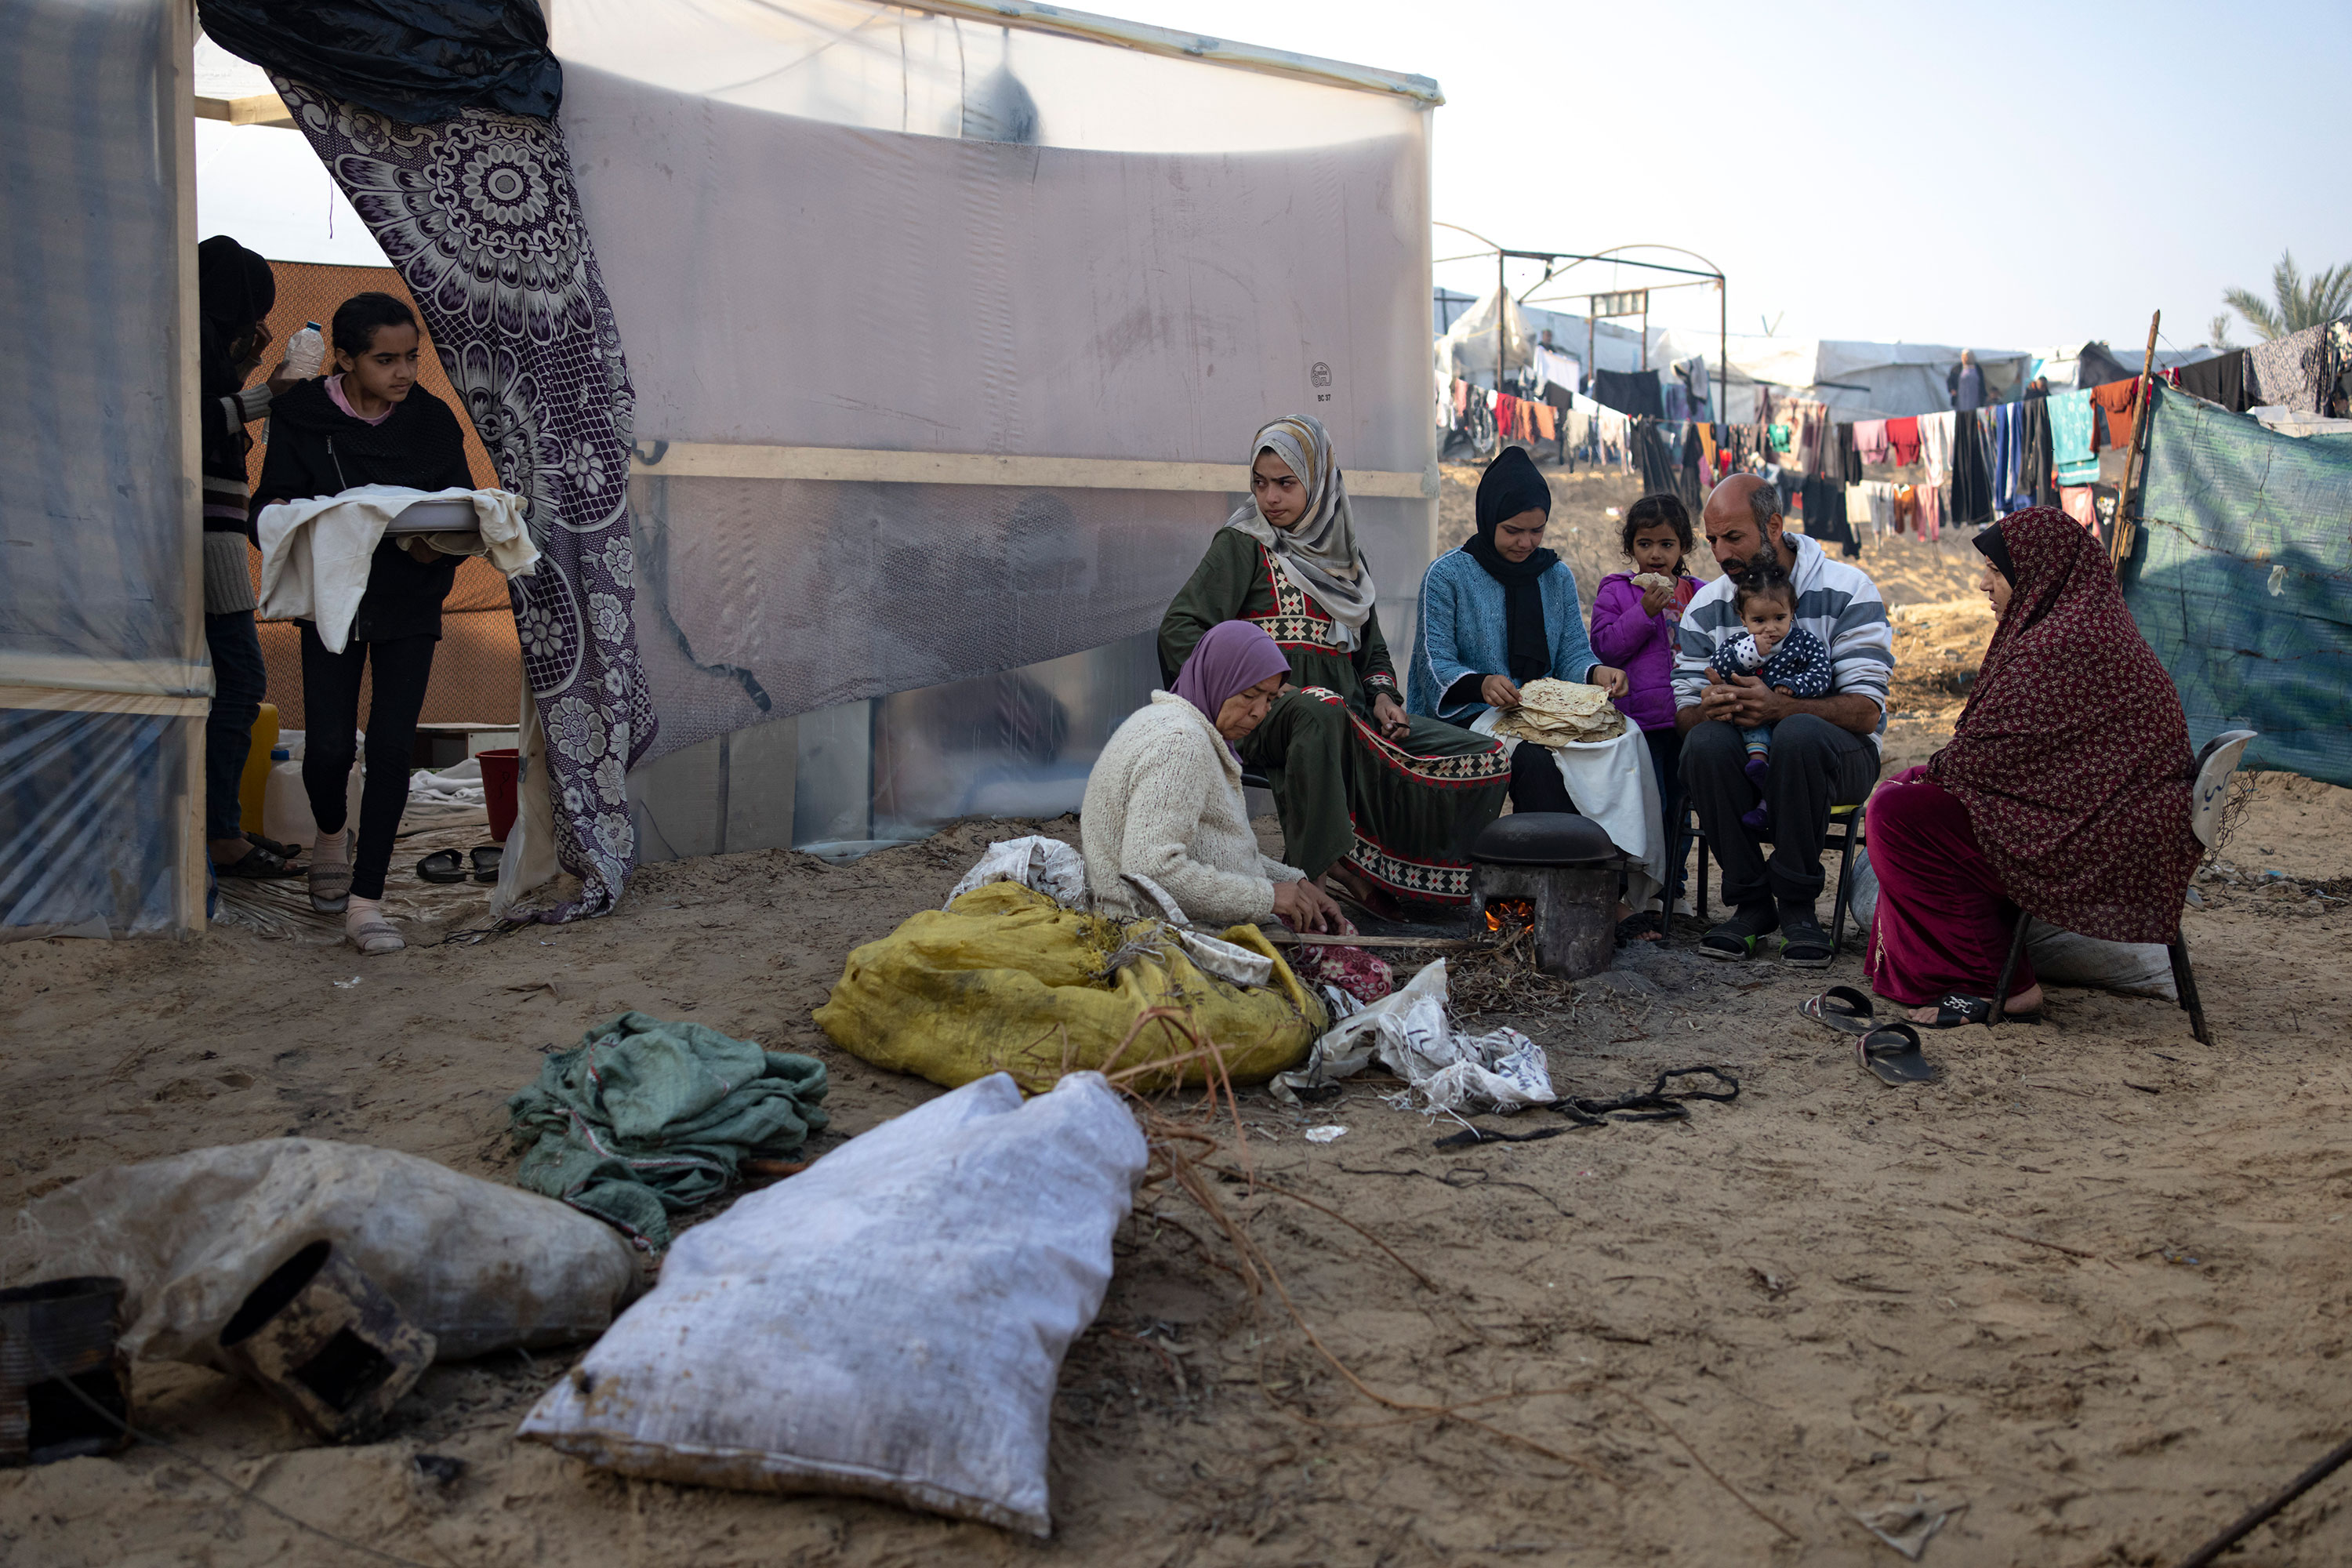 Members of the Abu Jarad family, who were displaced by the Israeli bombardment of Gaza, bake bread at a makeshift tent camp in the Muwasi area of southern Gaza on January 1. 